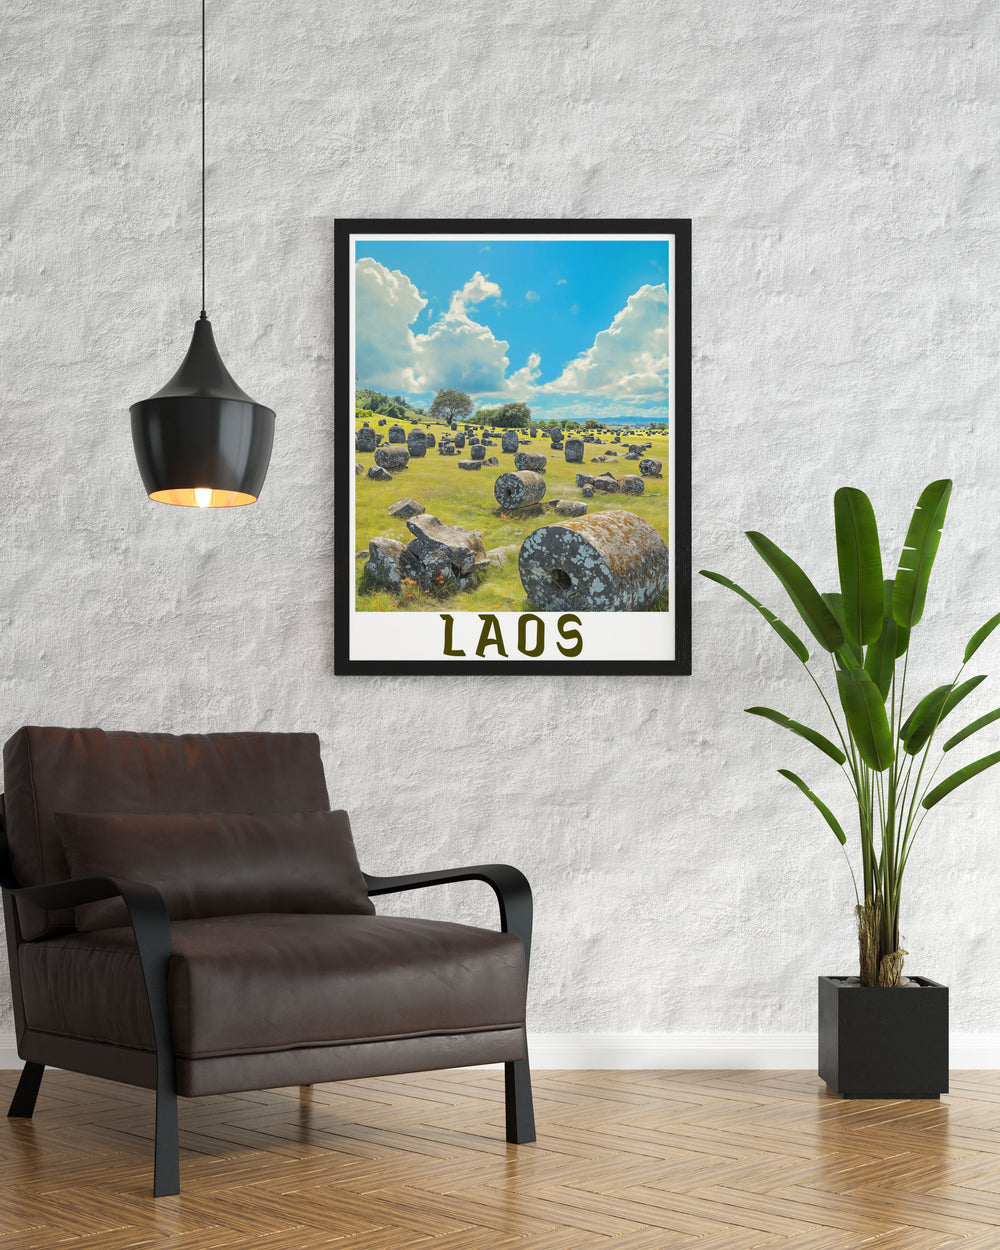 Transform your wall decor with the Agios Nikolaos Greece travel print capturing the serene charm of the Greek Island along with Plaon of Jars elegant home decor for a sophisticated touch in any room